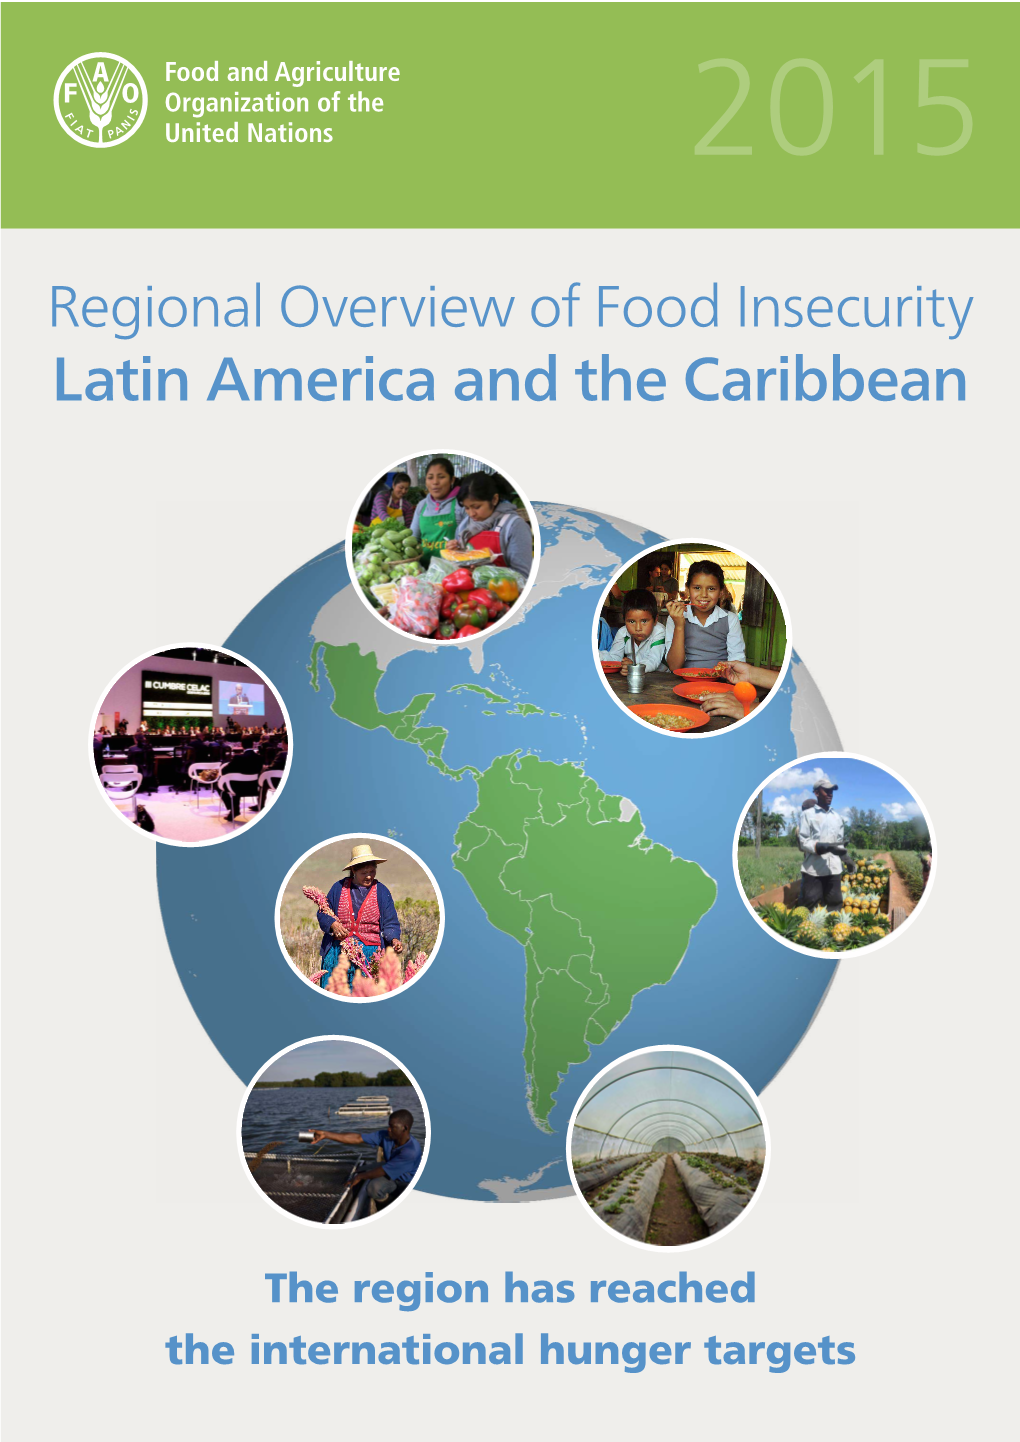 Regional Overview of Food Insecurity in Latin America and the Caribbean